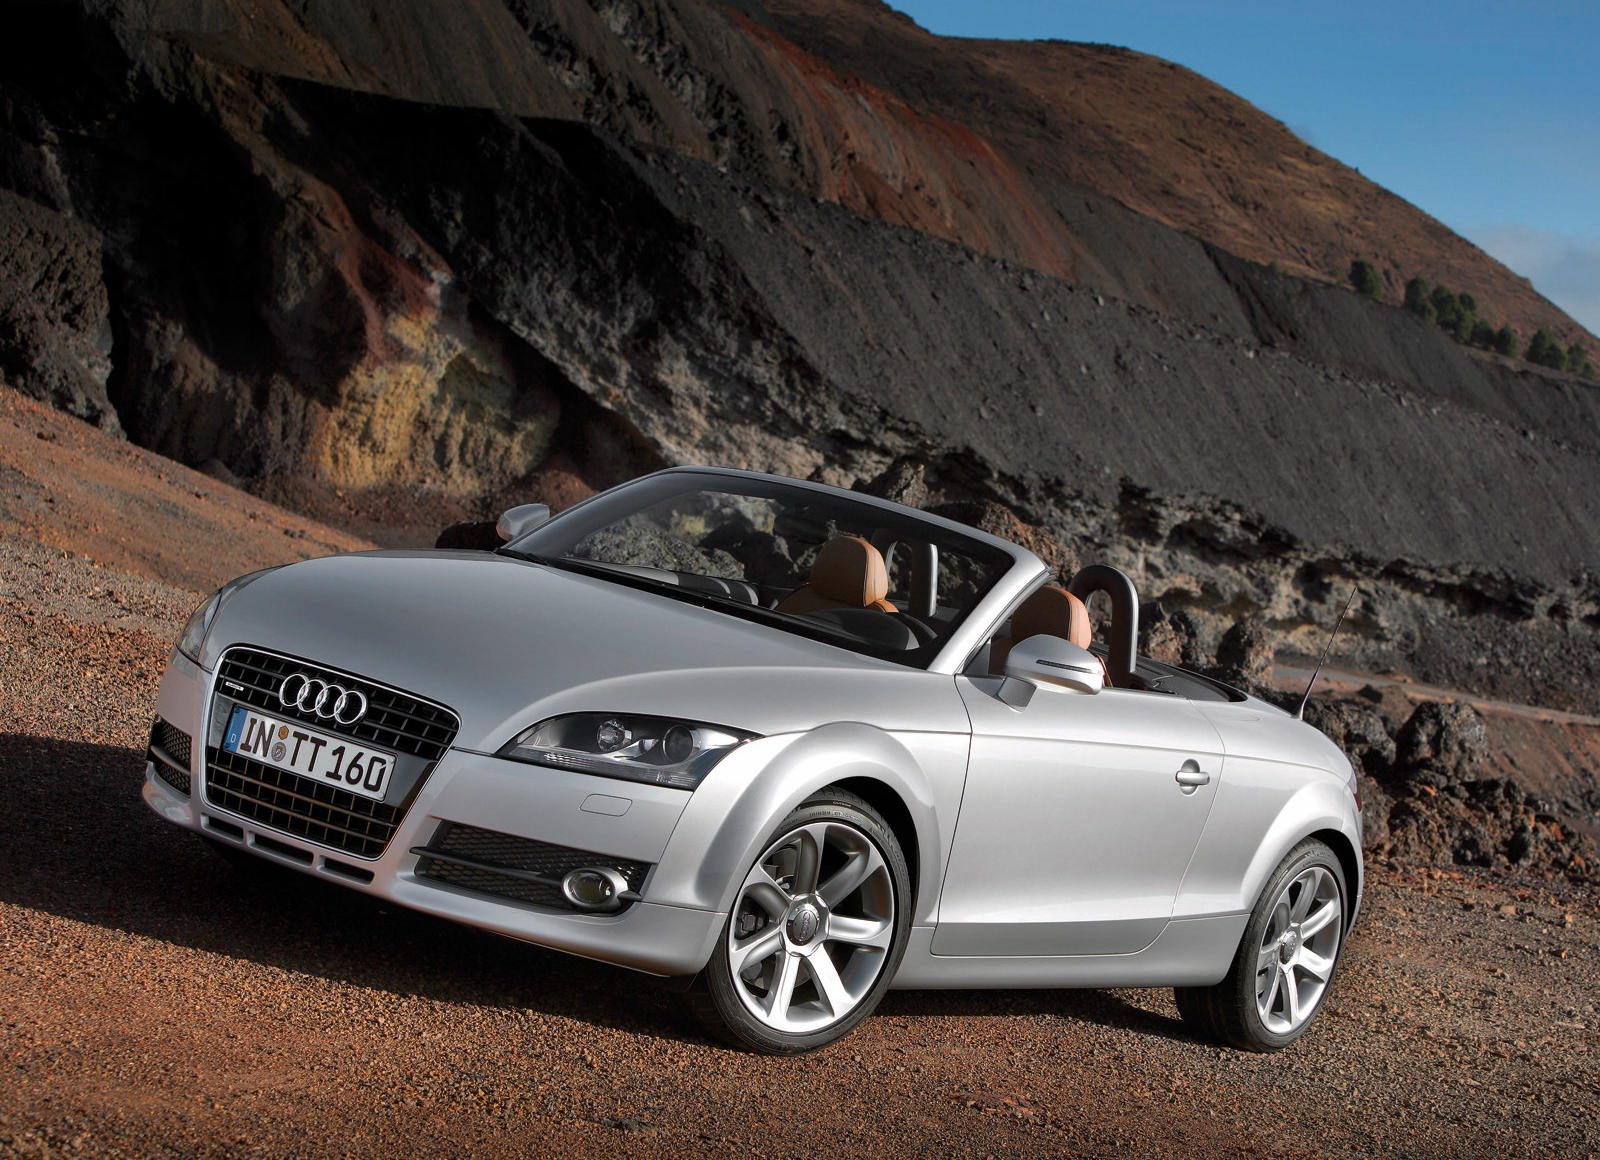 2008 Audi TT Roadster Front Angle View